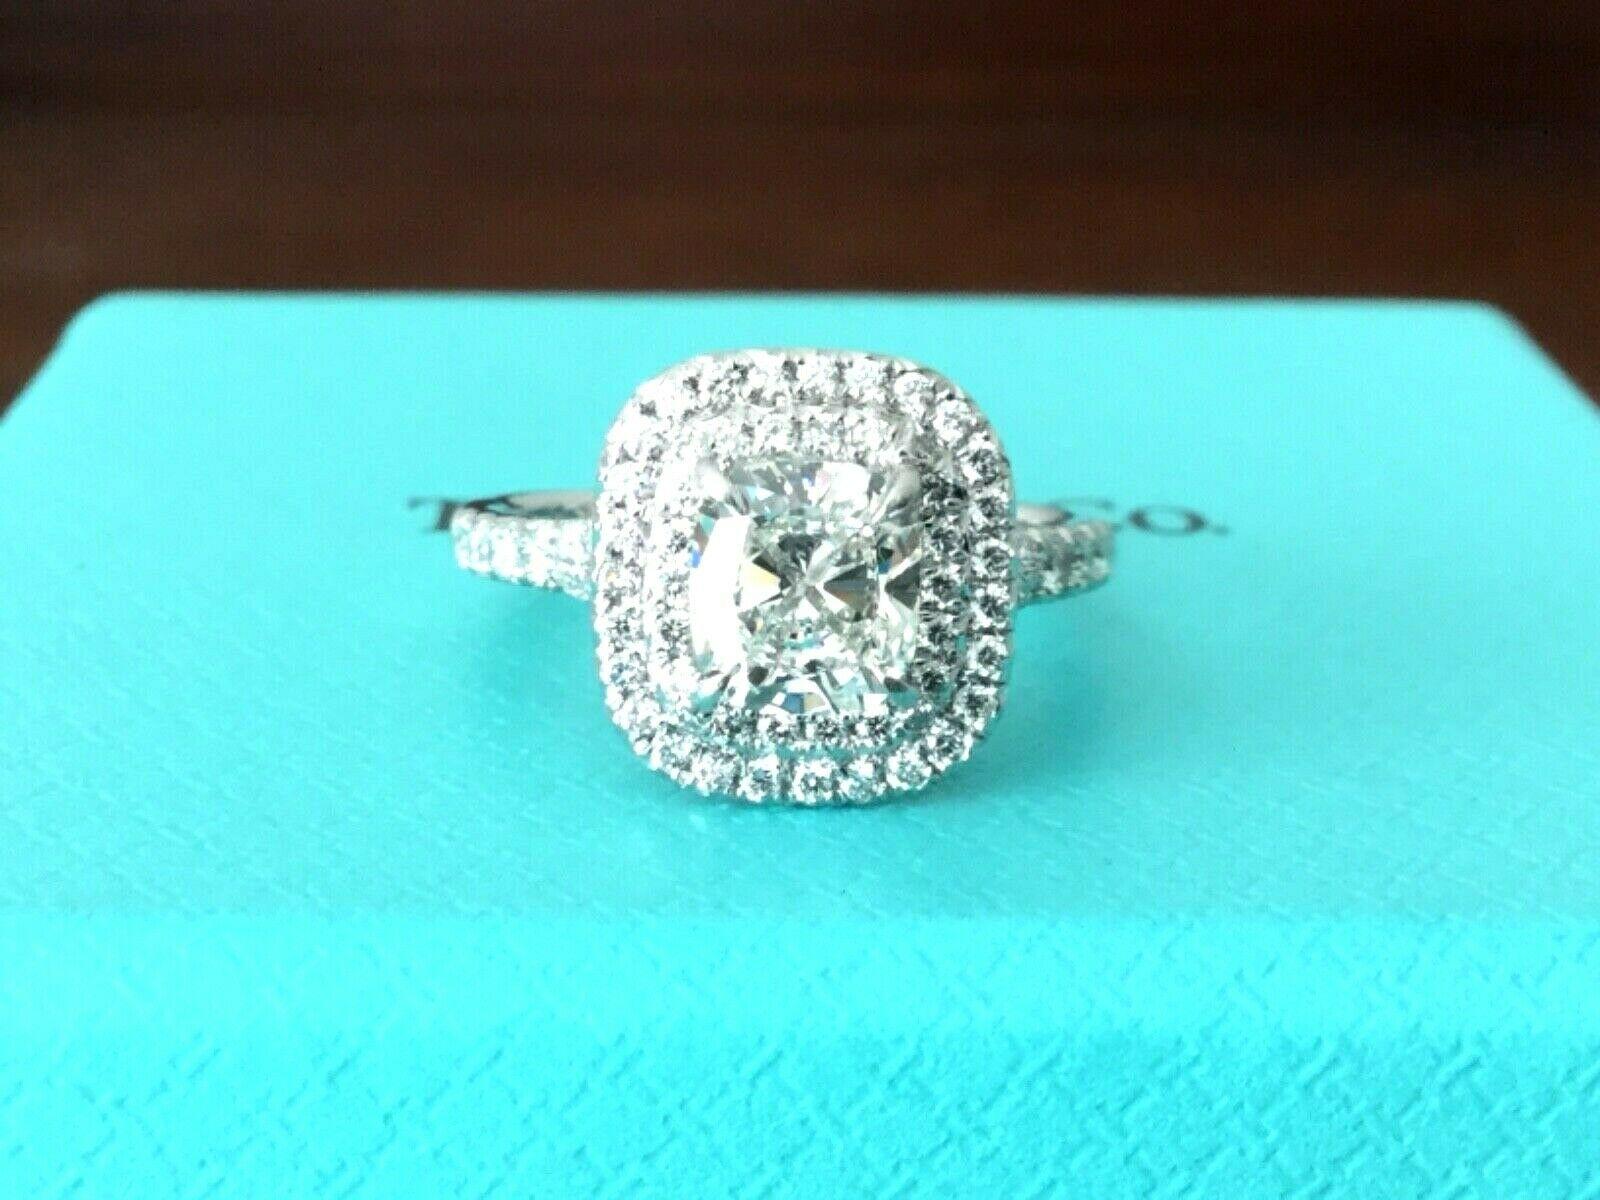 For your consideration is one of the HOTTEST Rings sold at Tiffany's.  The Tiffany Soleste!  This ring is perfect for an engagement ring or ideal as a cocktail ring - either way it is set to impress!

This specific diamond Soleste is special!  It